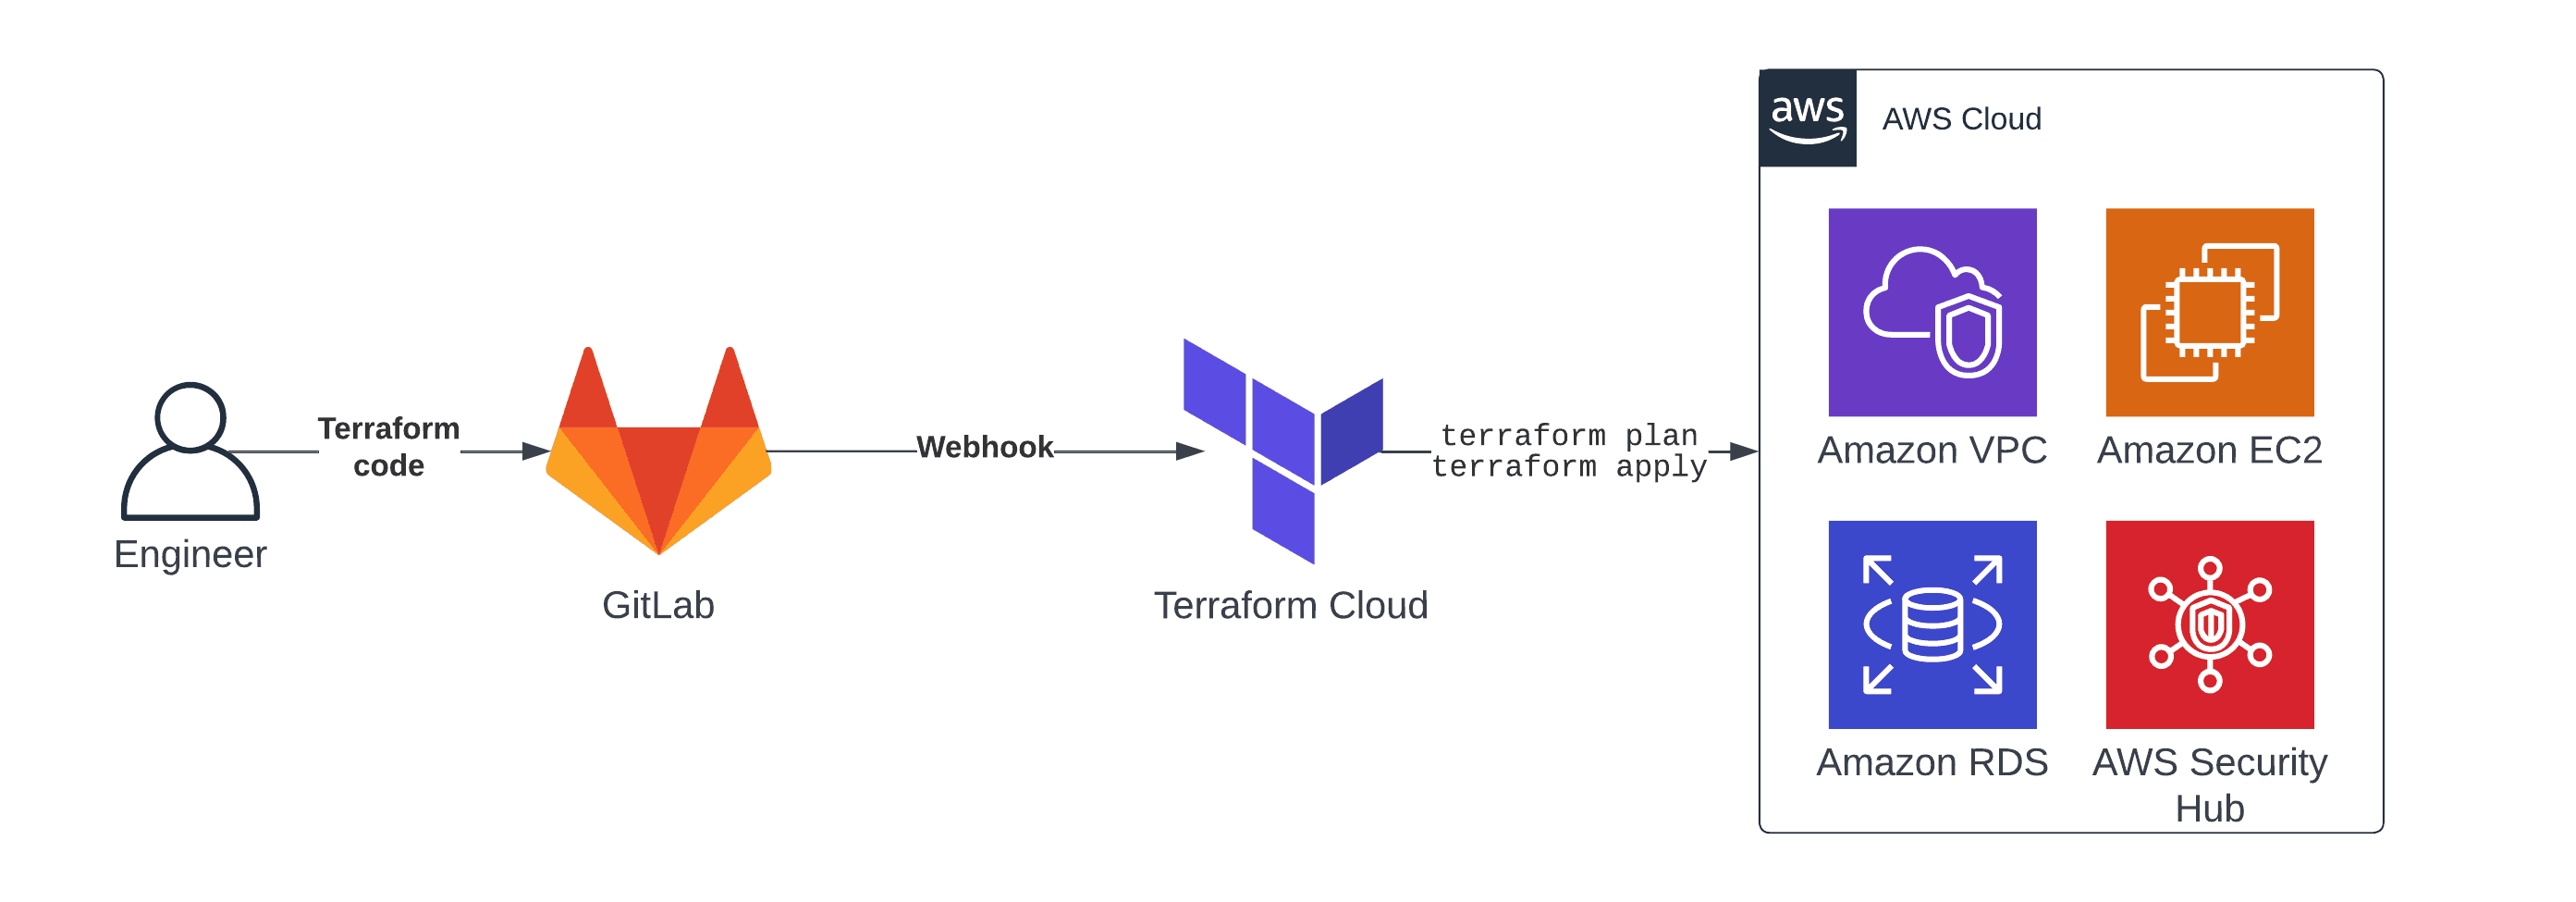 Infrastructure Pipeline with GitLab and Terraform Cloud